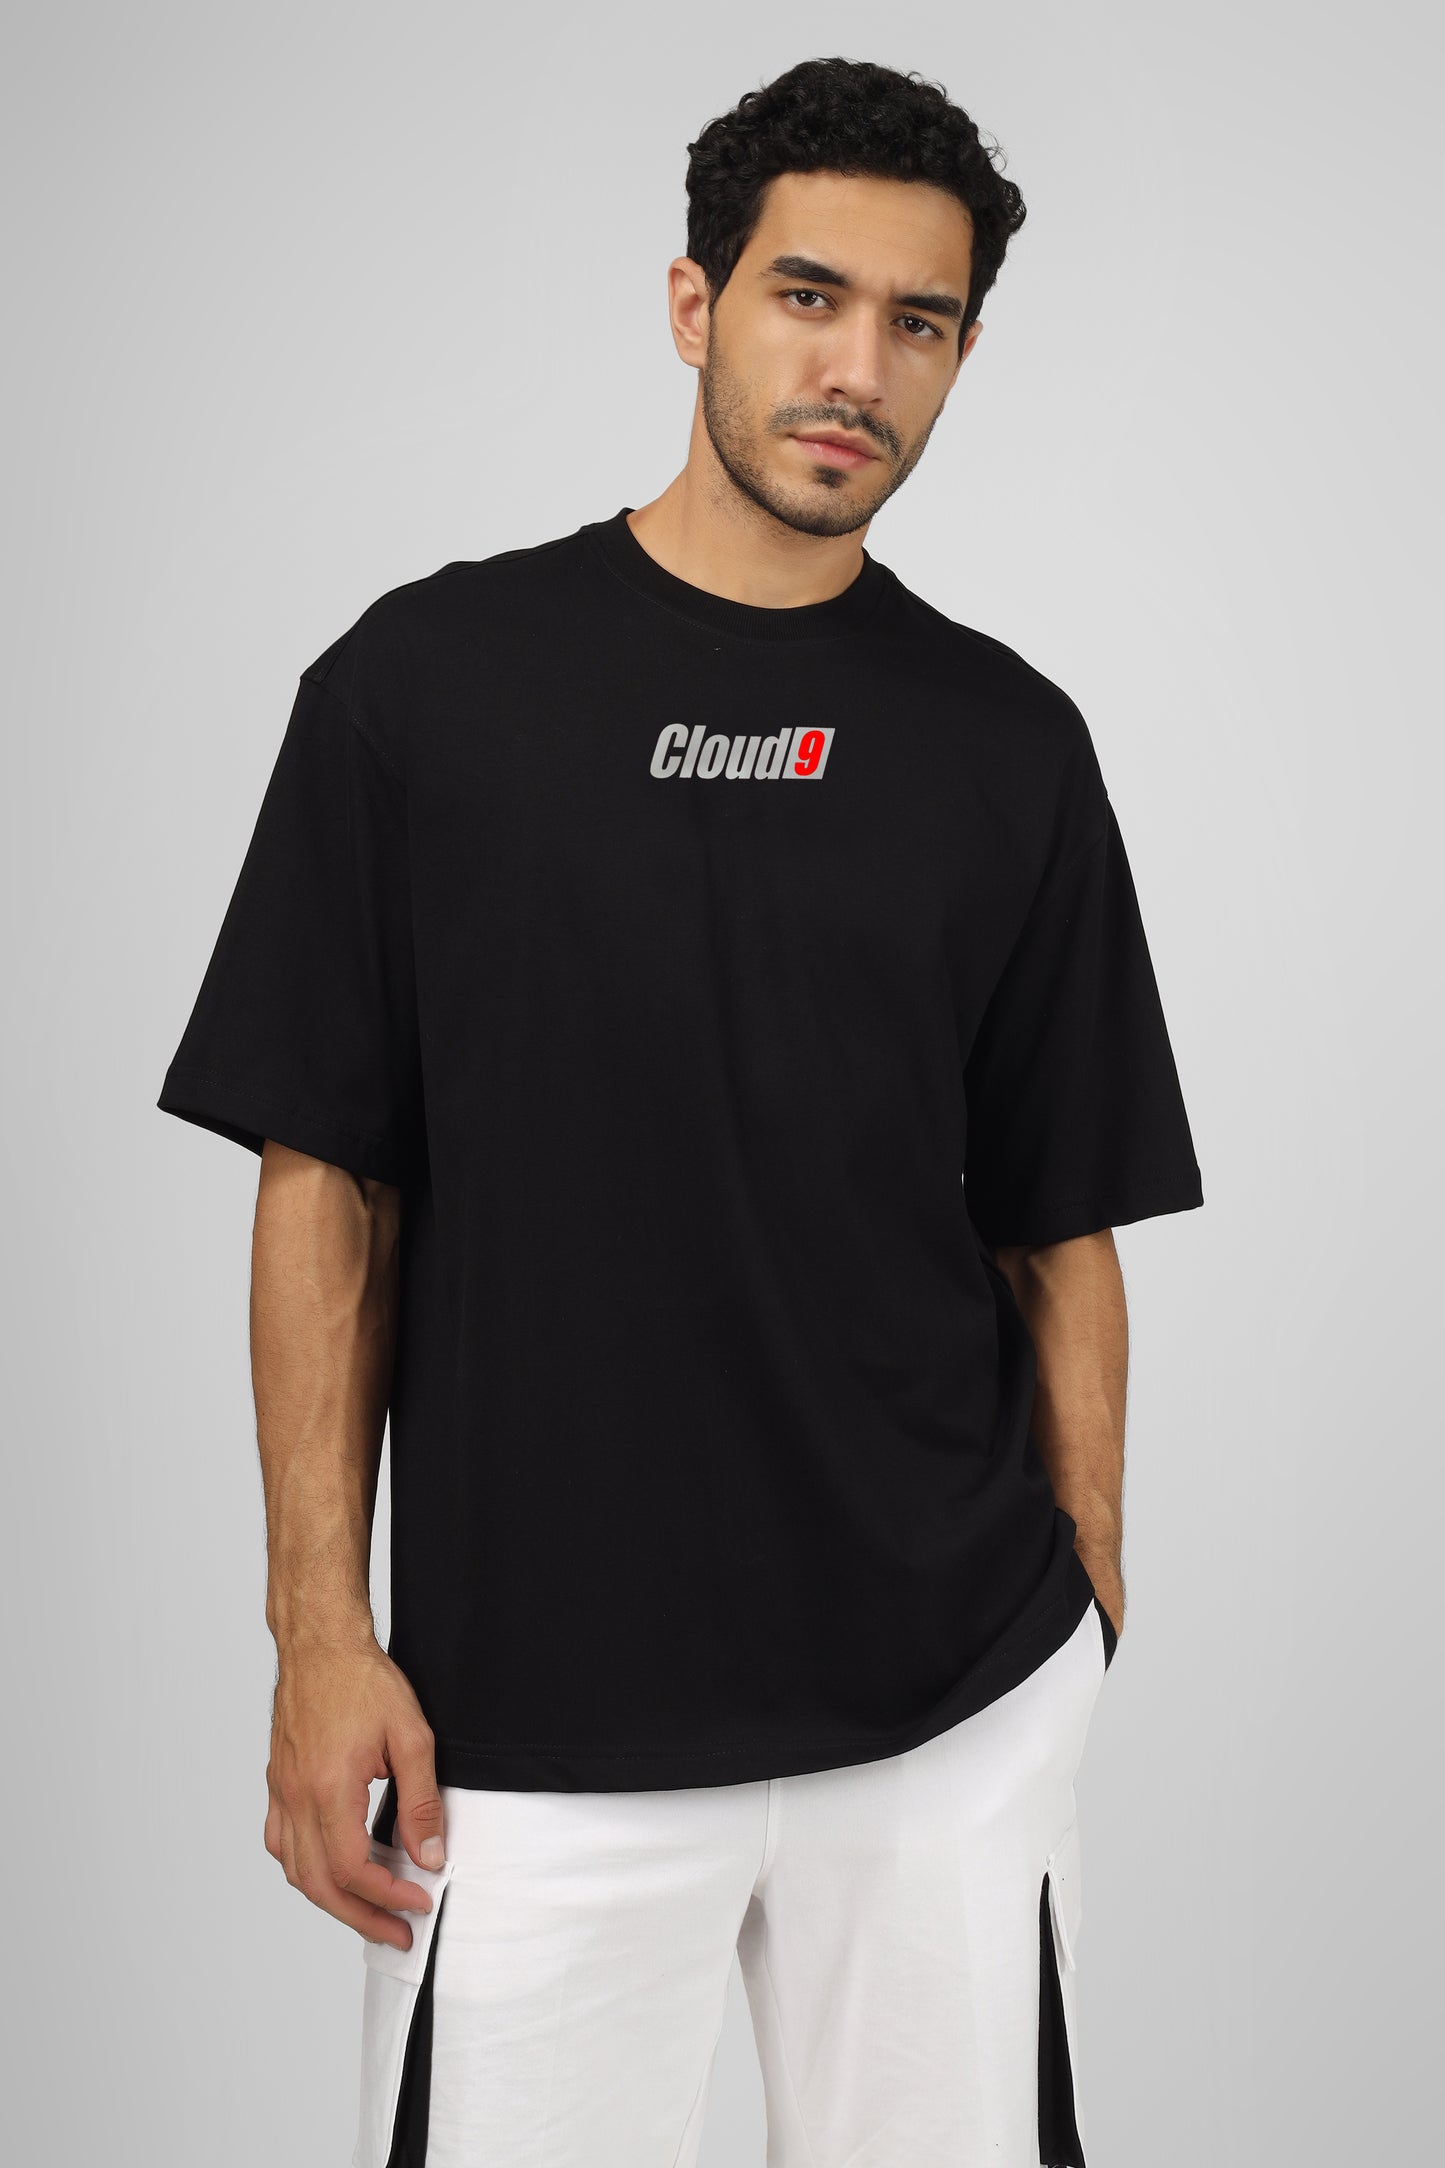 Cloud9 Over-Sized T-Shirt (Black)